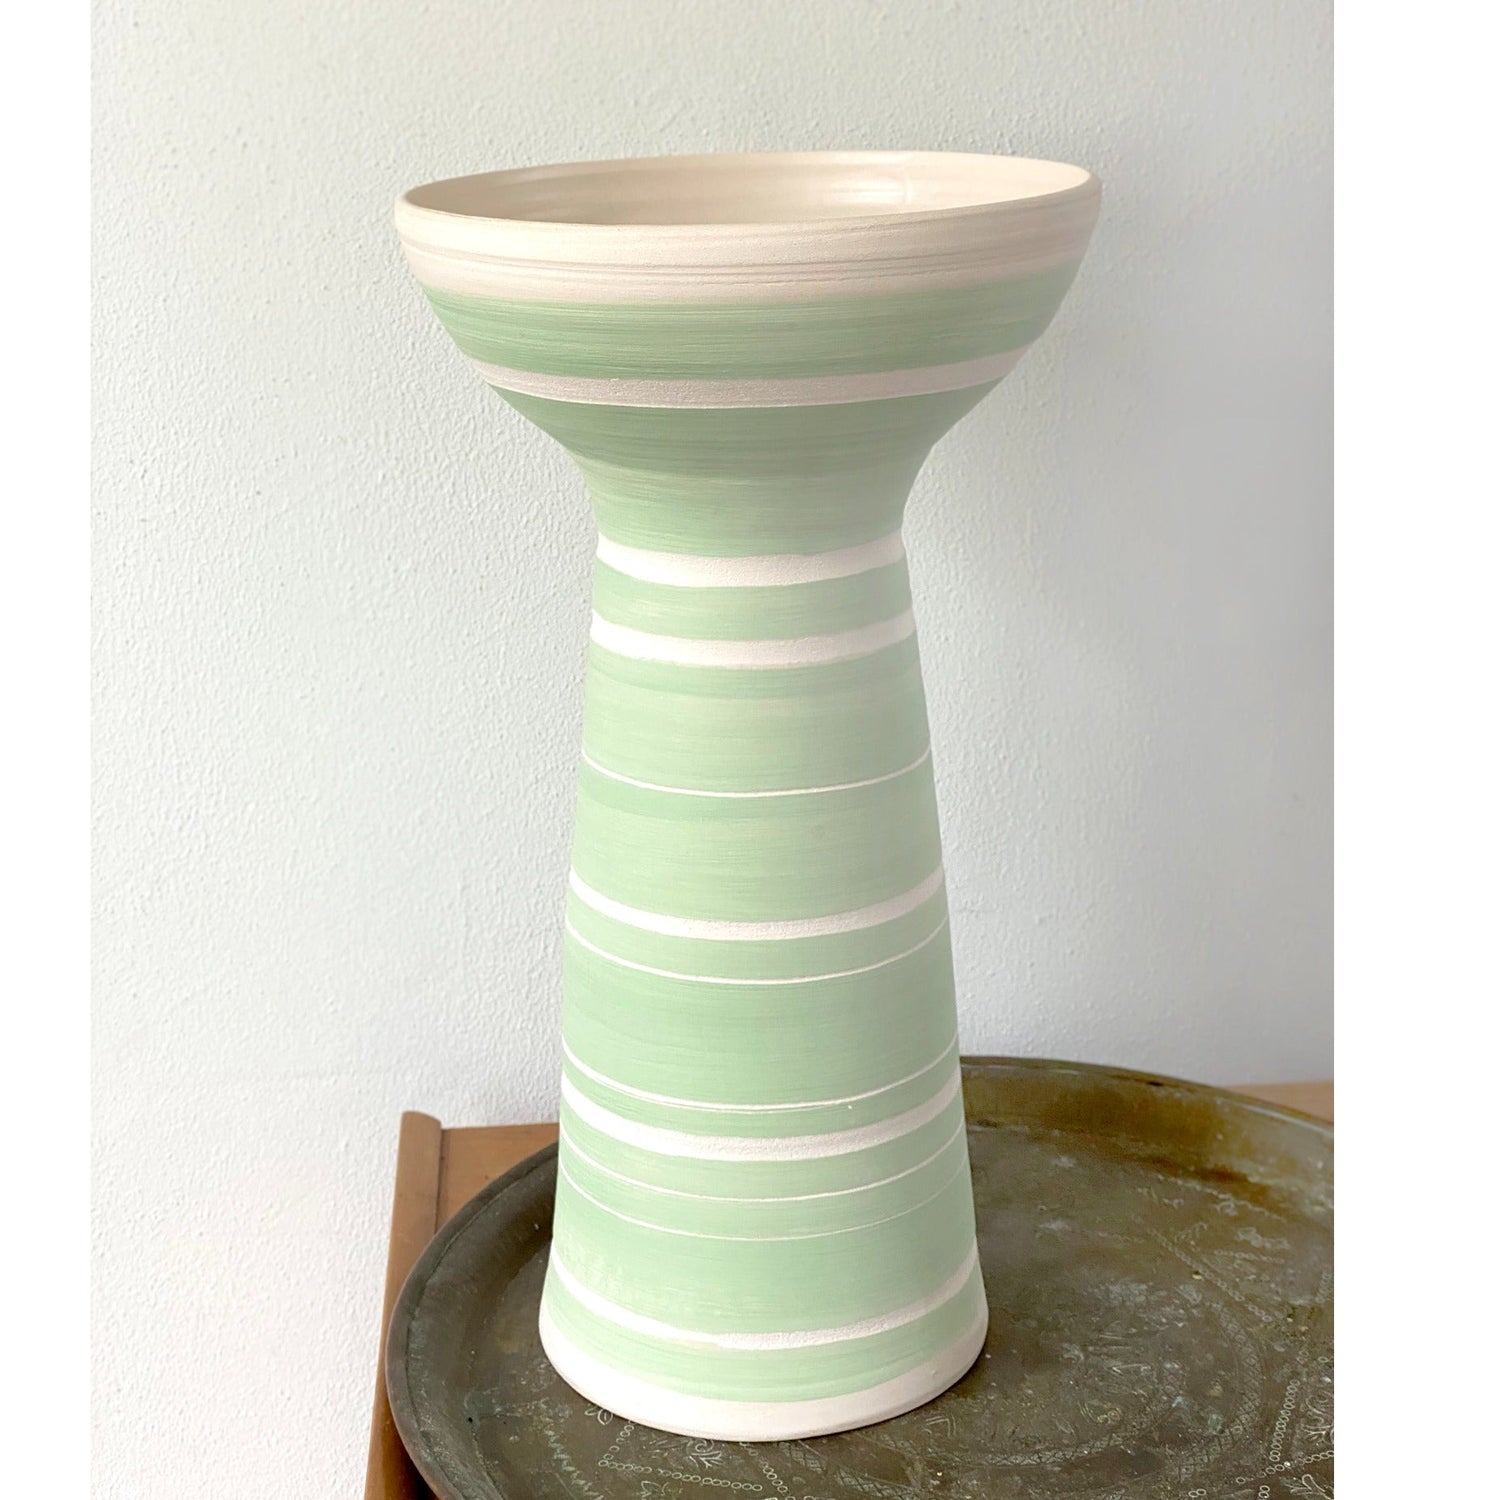 Striped vase - one of a kind